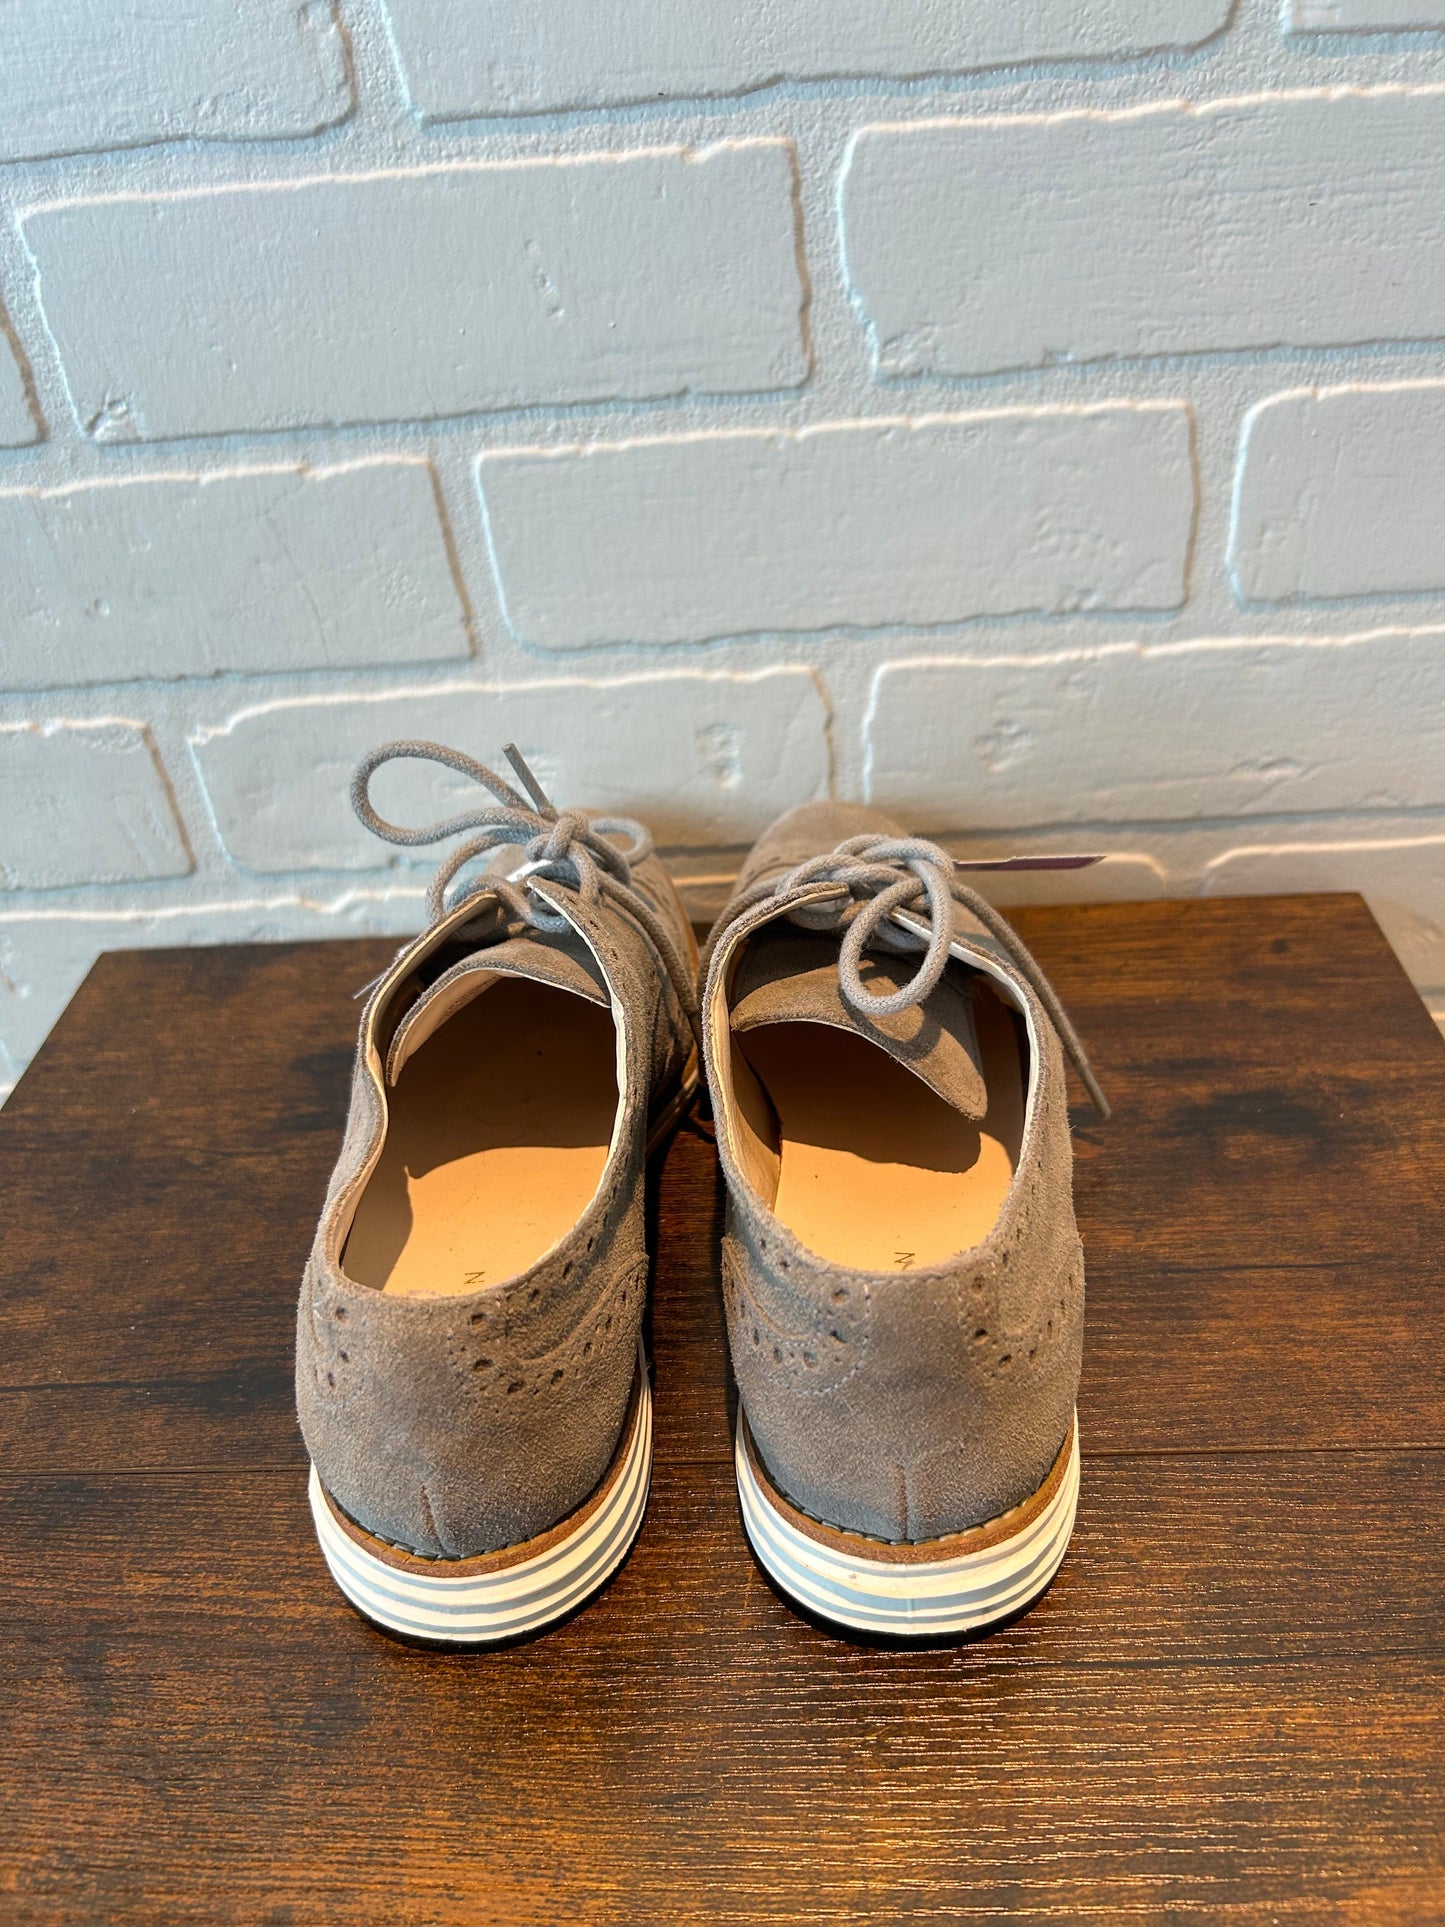 Grey Shoes Flats Cole-haan, Size 5.5